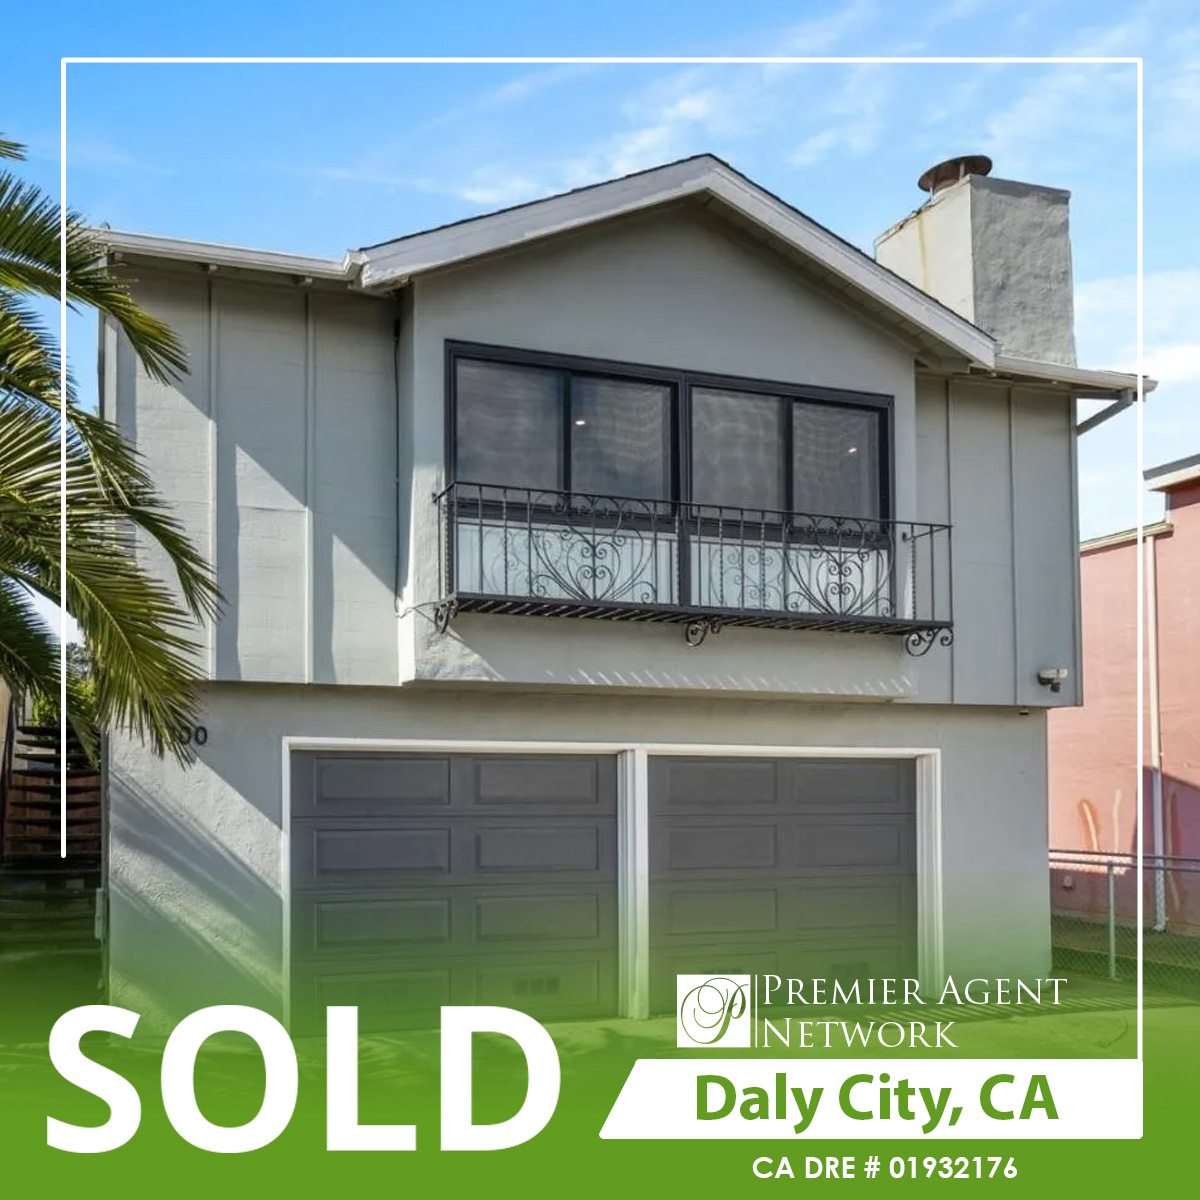 ** Sold **
300 Morton Dr, Daly City, CA 94015 | $1,400,000
SFR, 4 bed, 3 bath, 1,630 sqft, 3,102 sqft lot
Listed by Ravinesh Sen at Premier Agent Network

#DalyCity #ca #california #Singlefamily #residential #homes #home #realtor #agent #realestateagent #premieragentnetwork